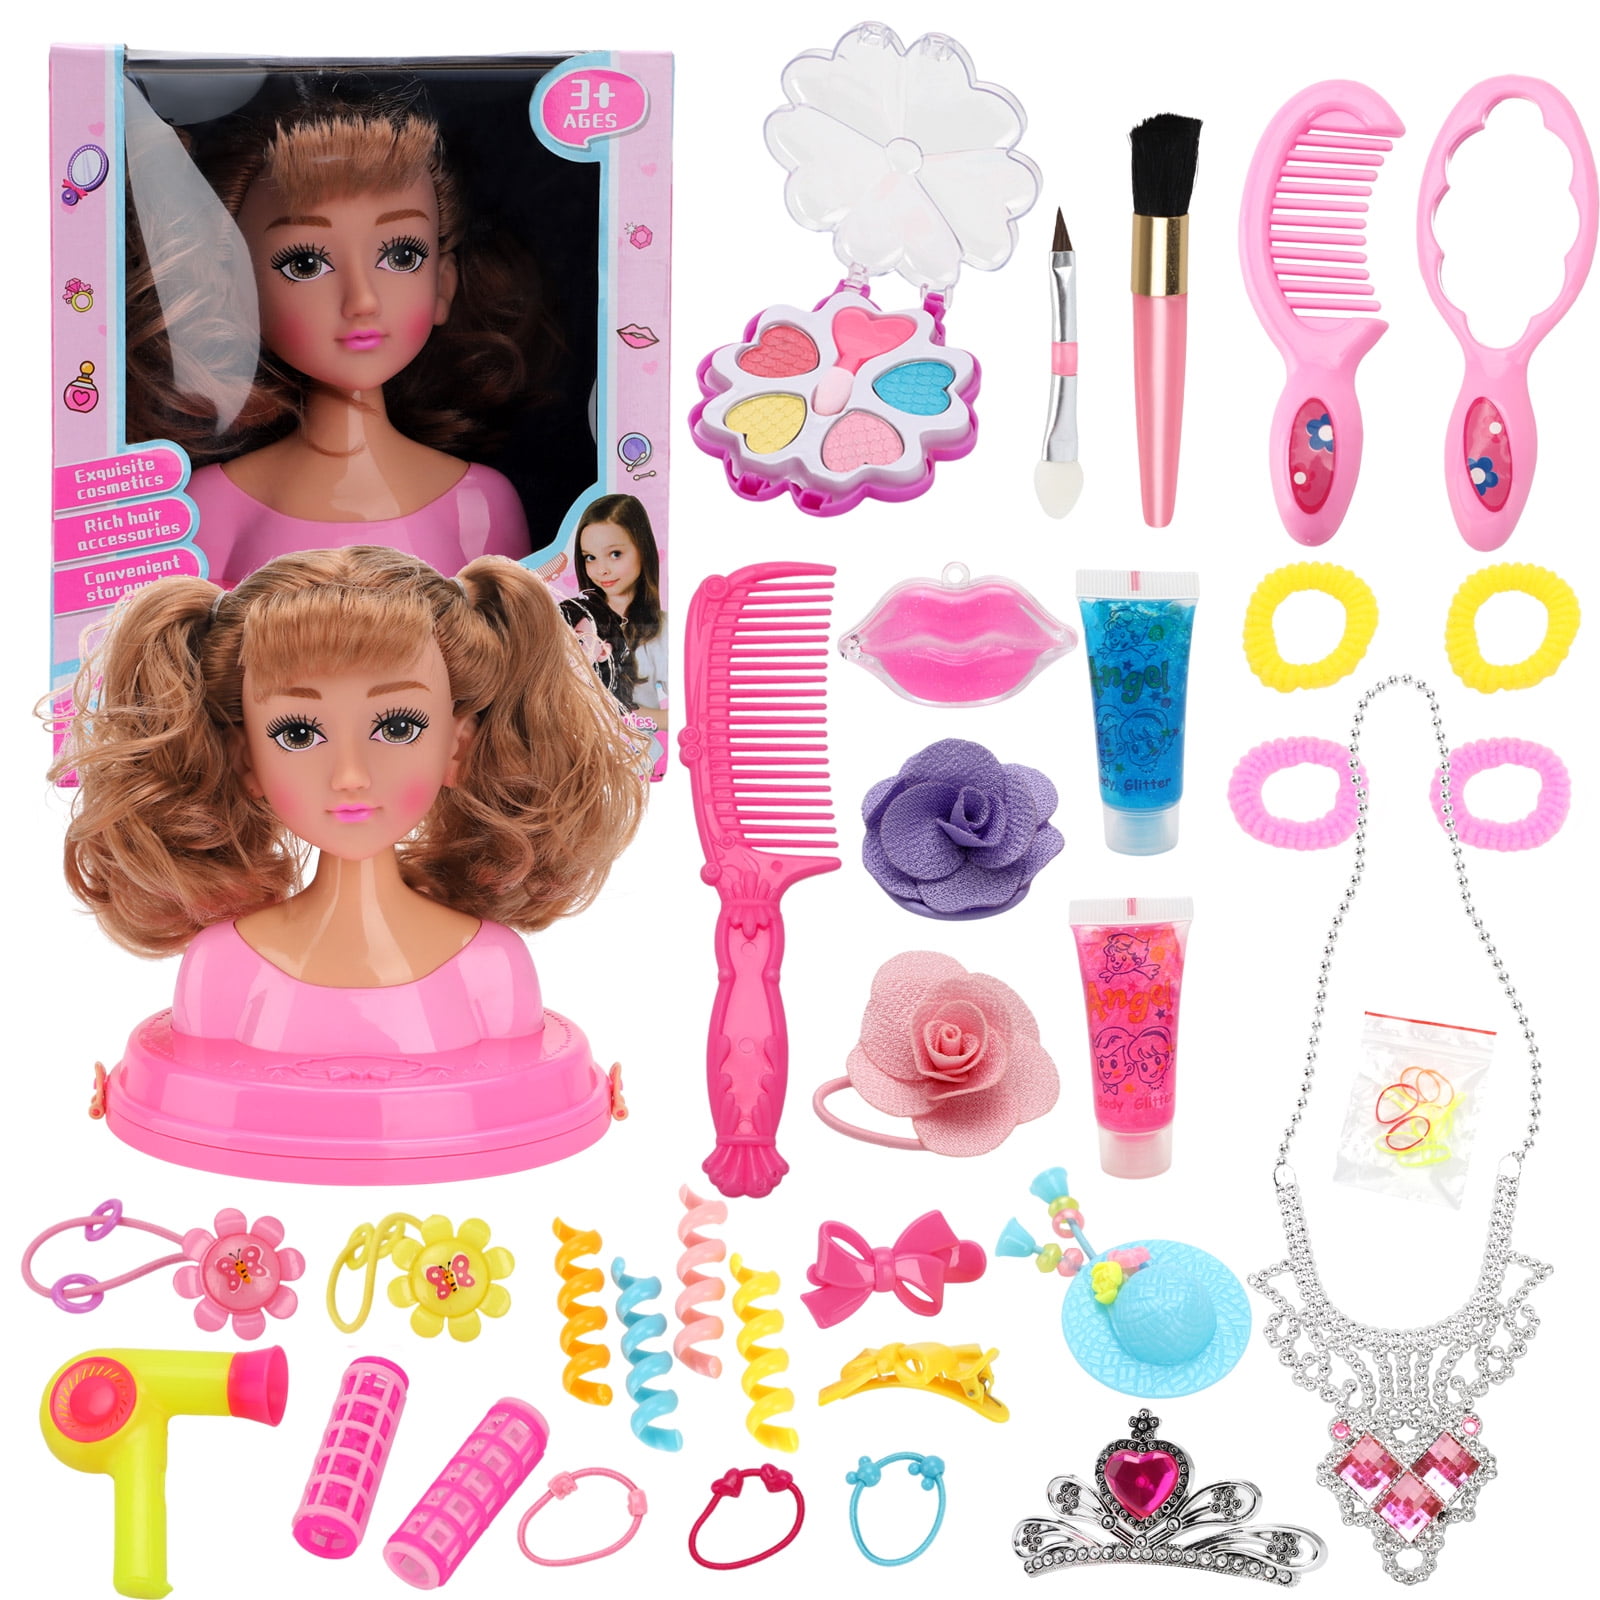  Makeup and Hair Styling Doll Head Toy Kit - Kids Pretend Play  Set with Real Washable Cosmetics and Style Accessories for Little Girls :  Toys & Games